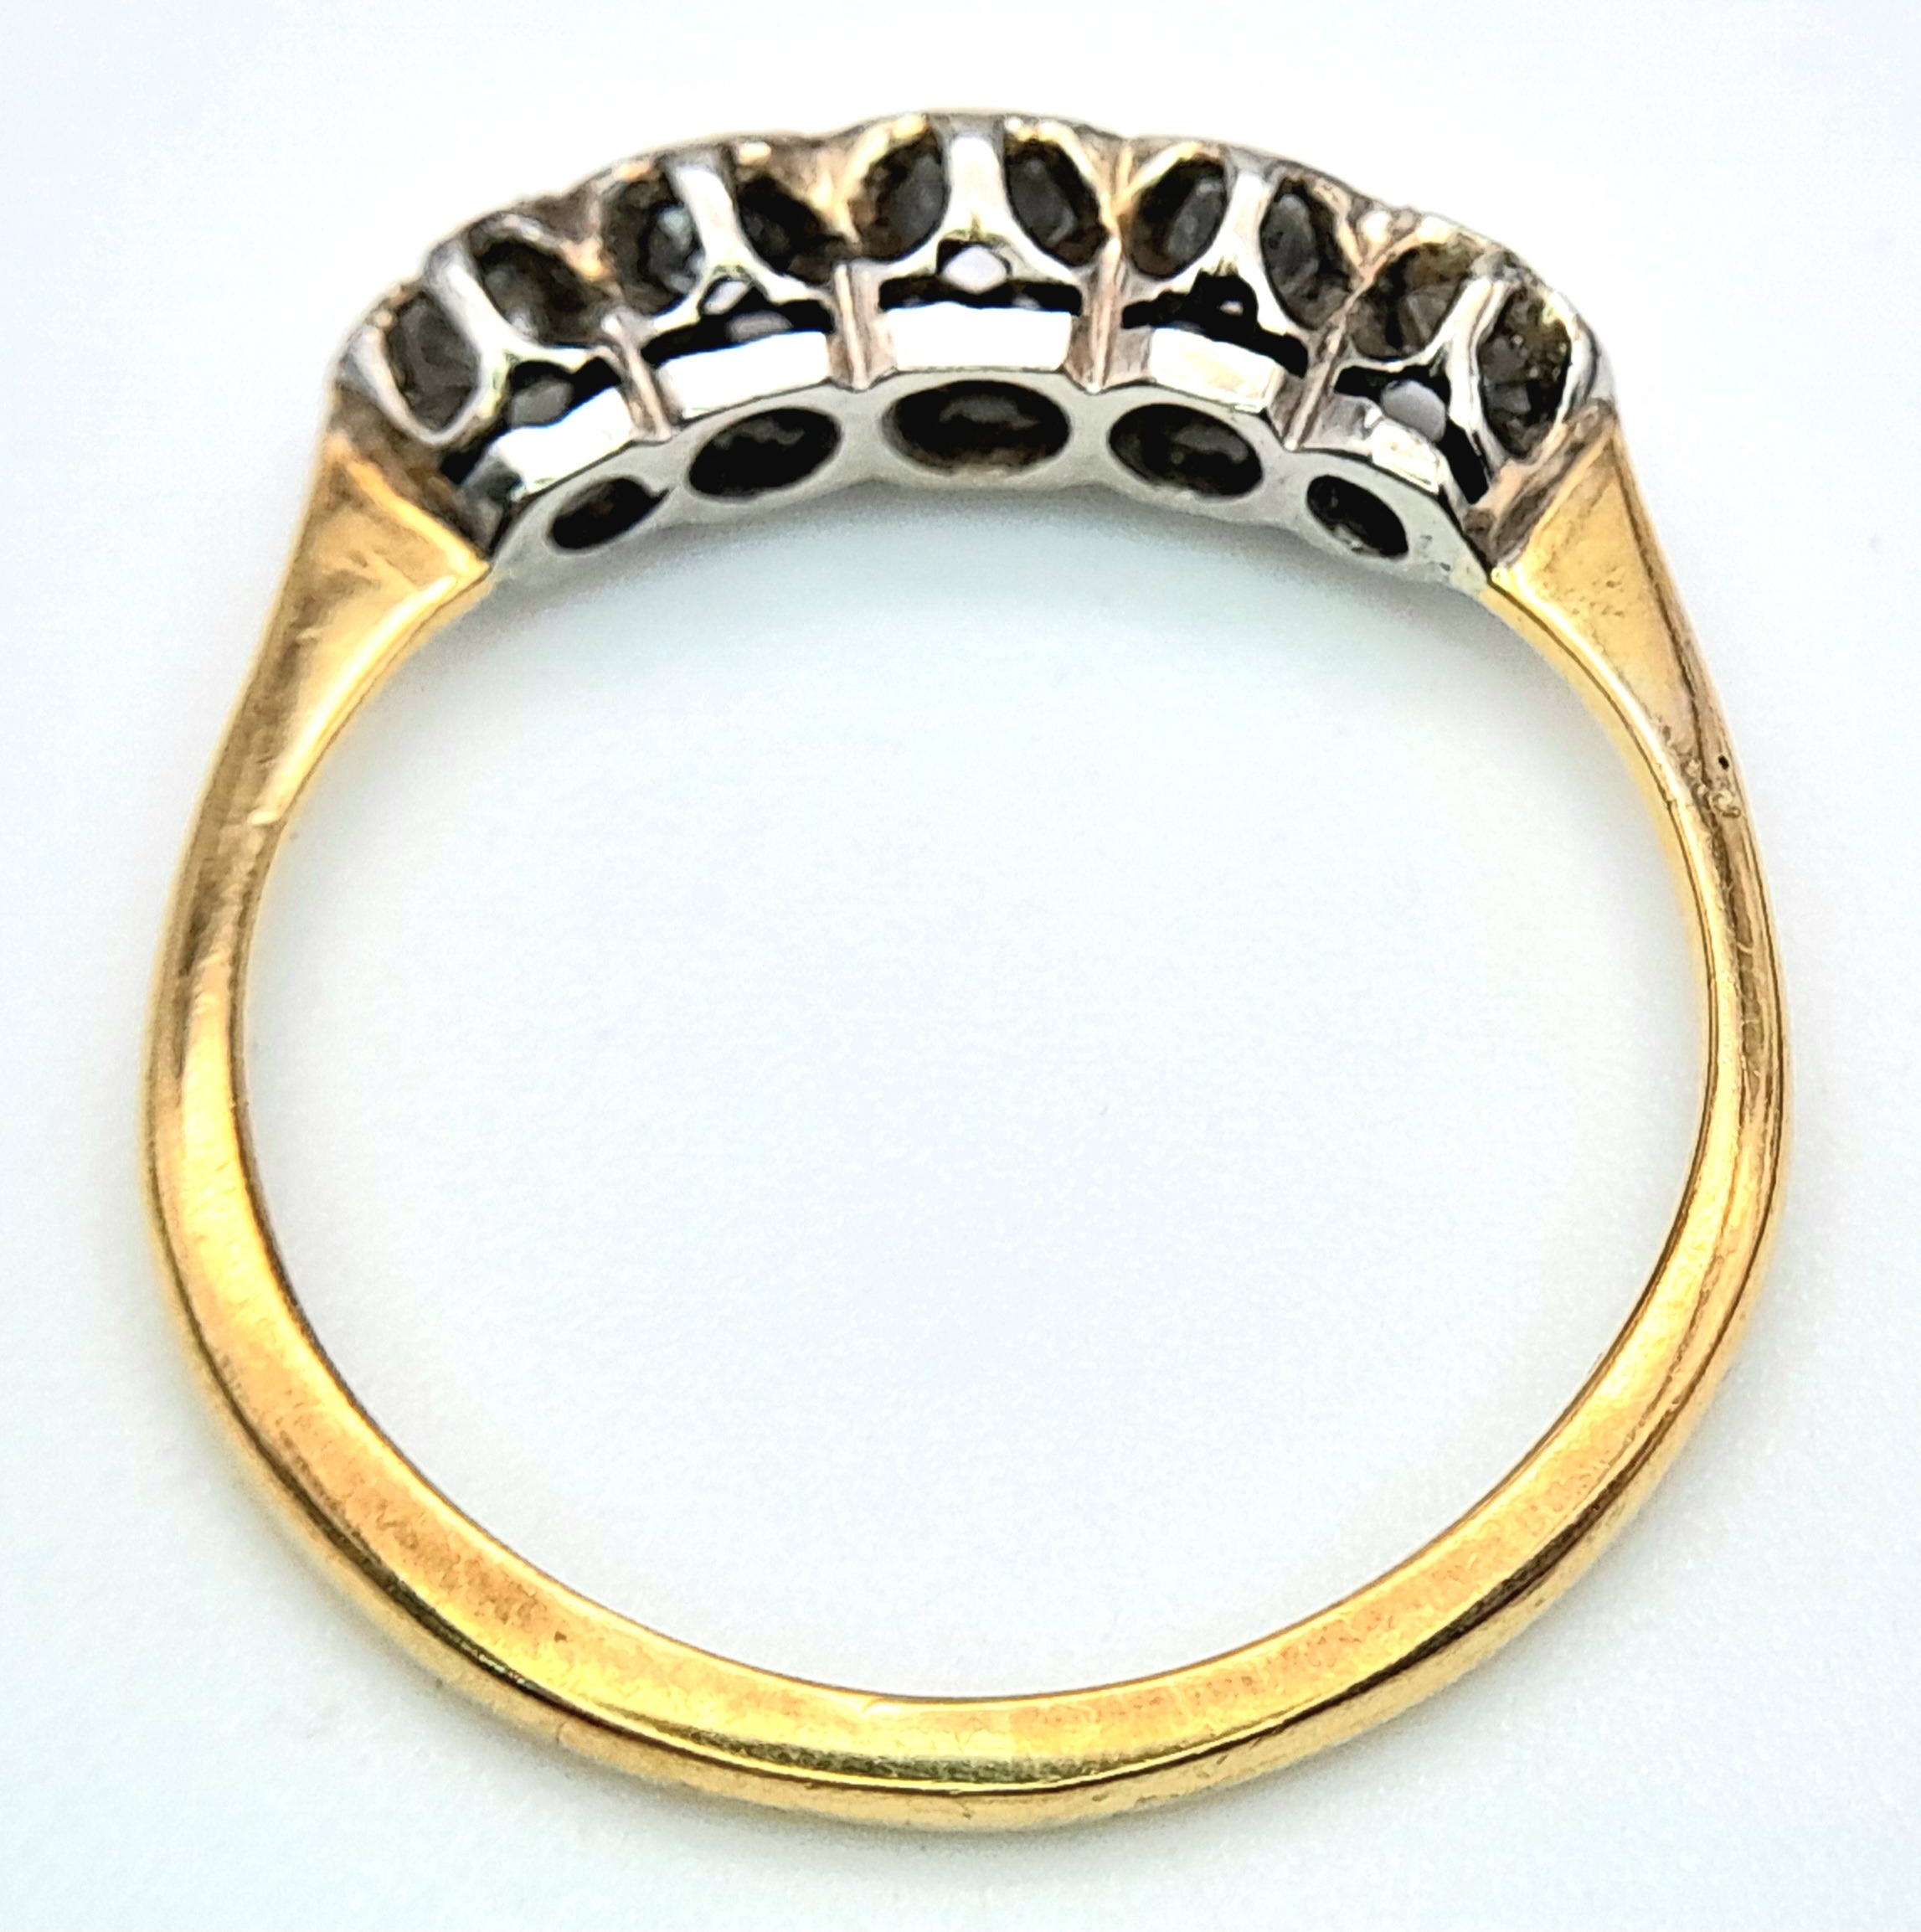 AN 18K YELLOW GOLD AND PLATINUM VINTAGE DIAMOND 5 STONE RING. 0.40CT. 2.5G. SIZE N - Image 5 of 6